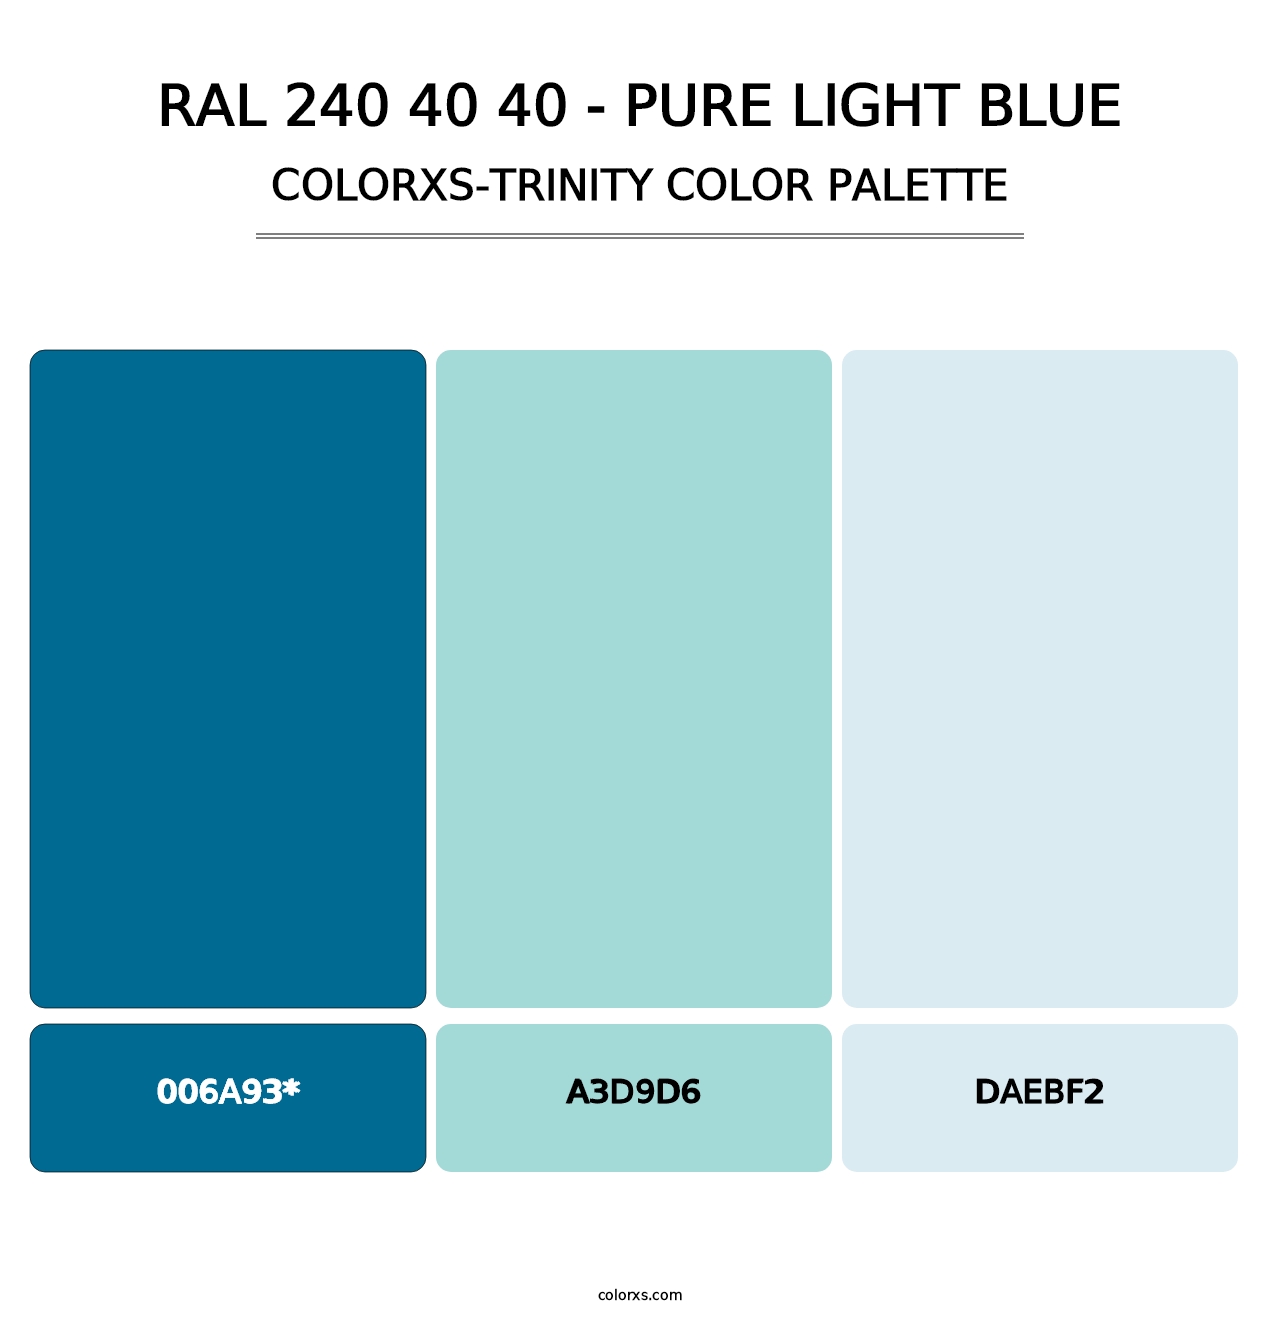 RAL 240 40 40 - Pure Light Blue - Colorxs Trinity Palette